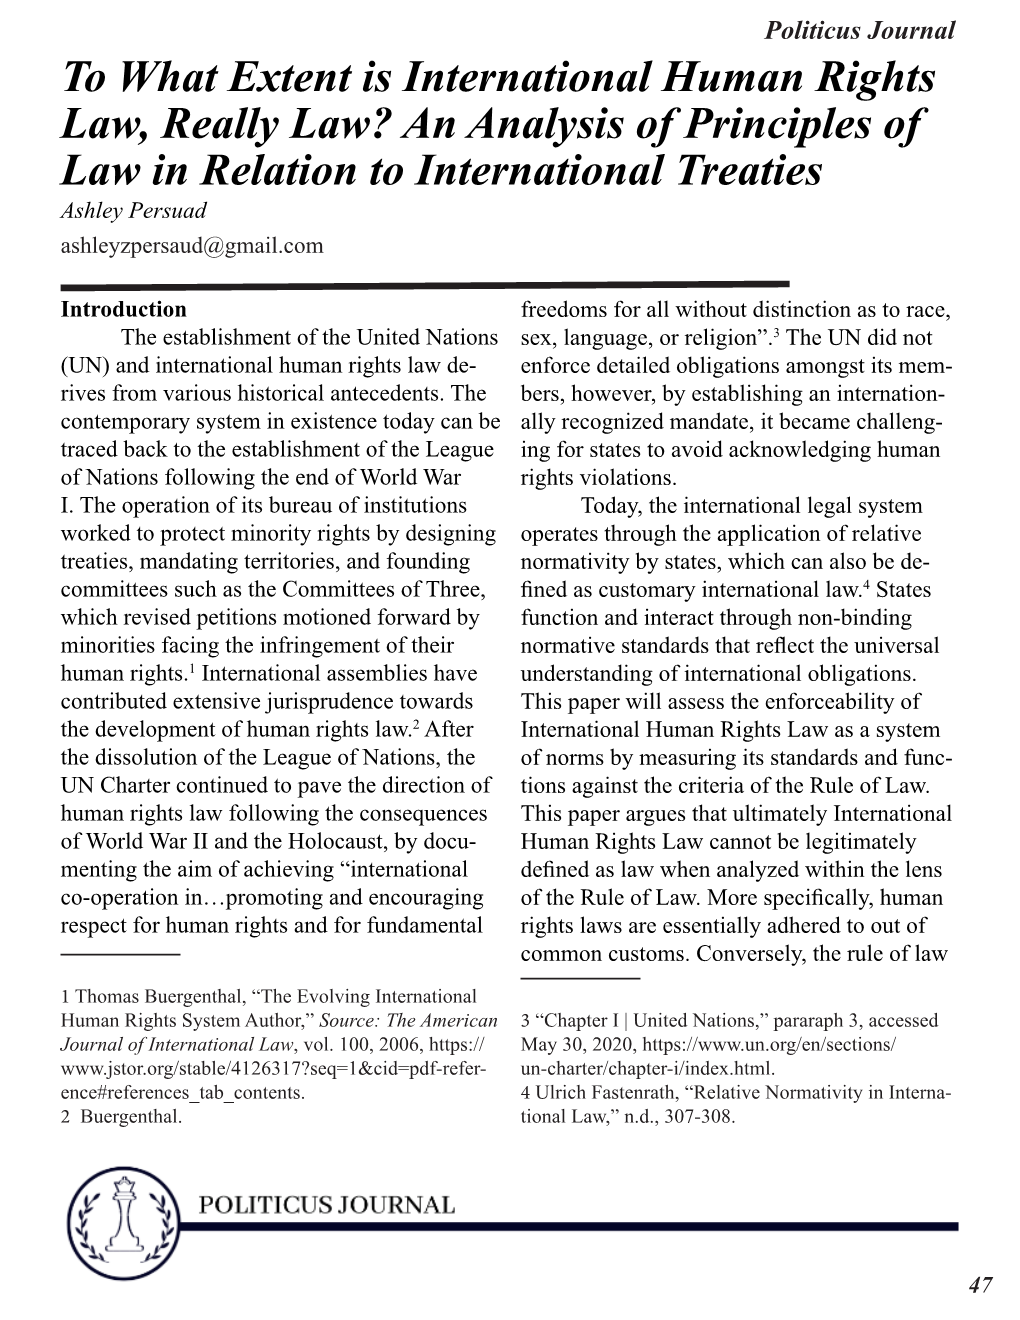 To What Extent Is International Human Rights Law, Really Law? an Analysis of Principles of Law in Relation to International Trea